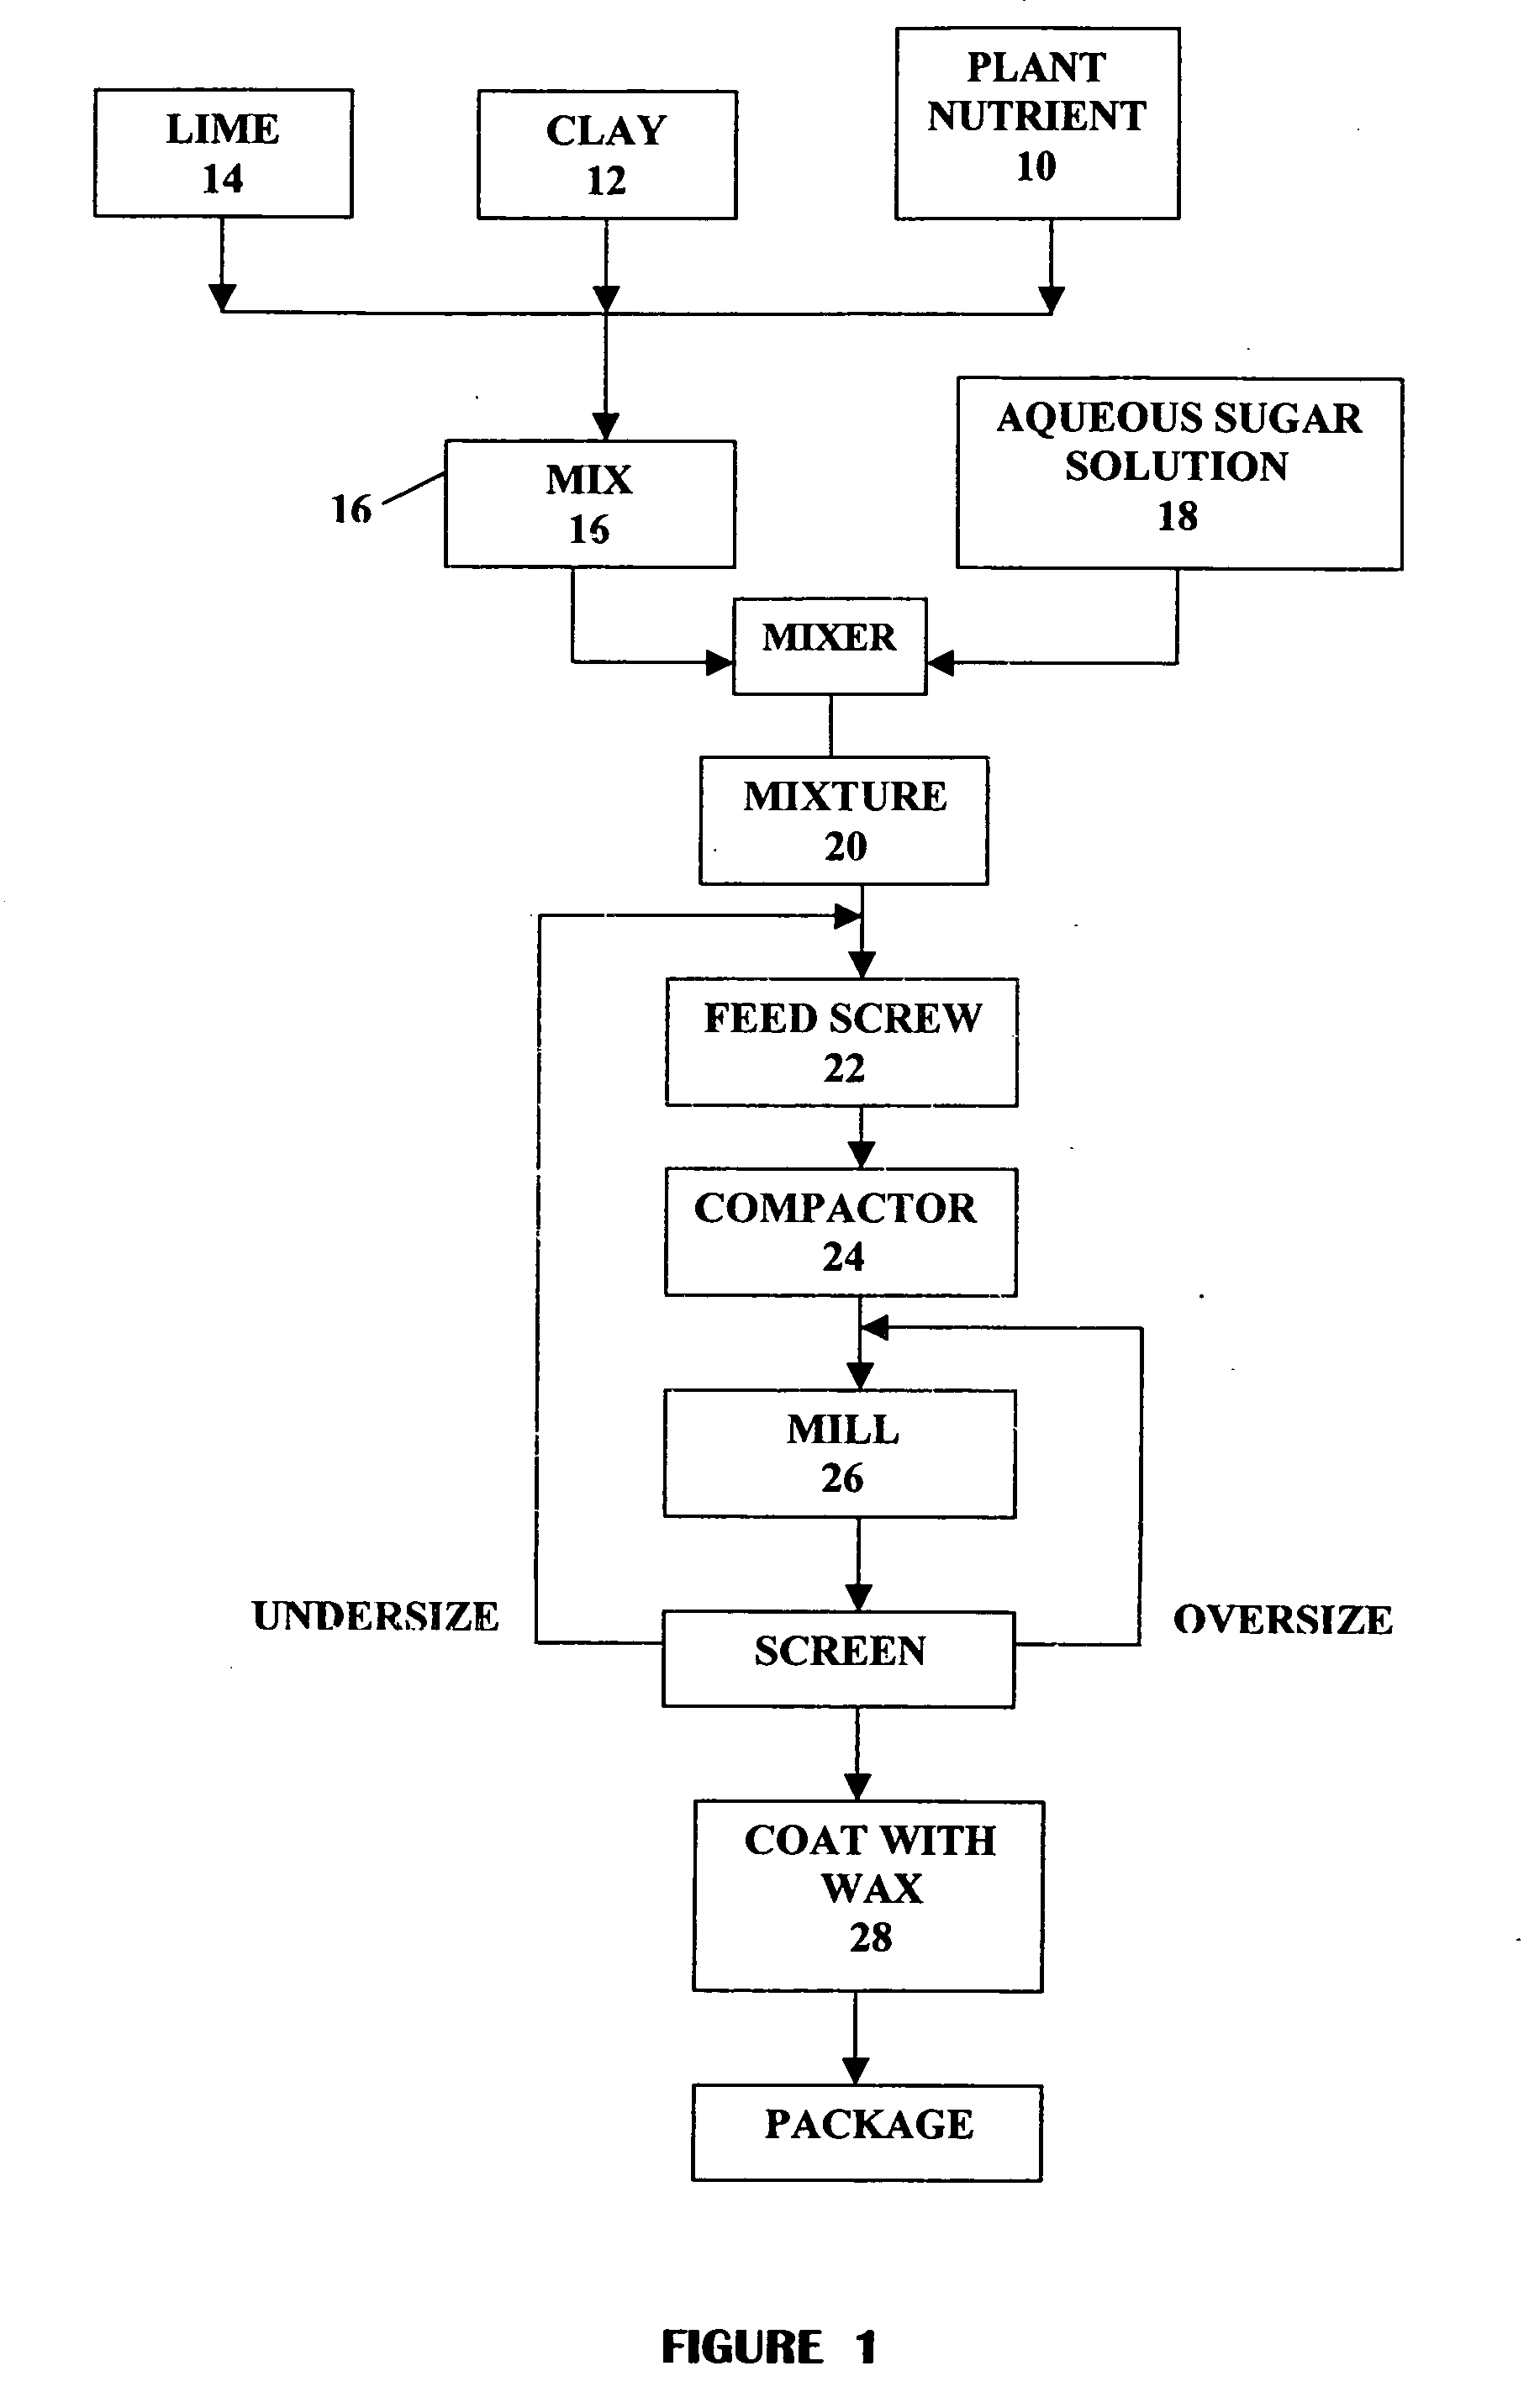 Plant nutrient and method of making